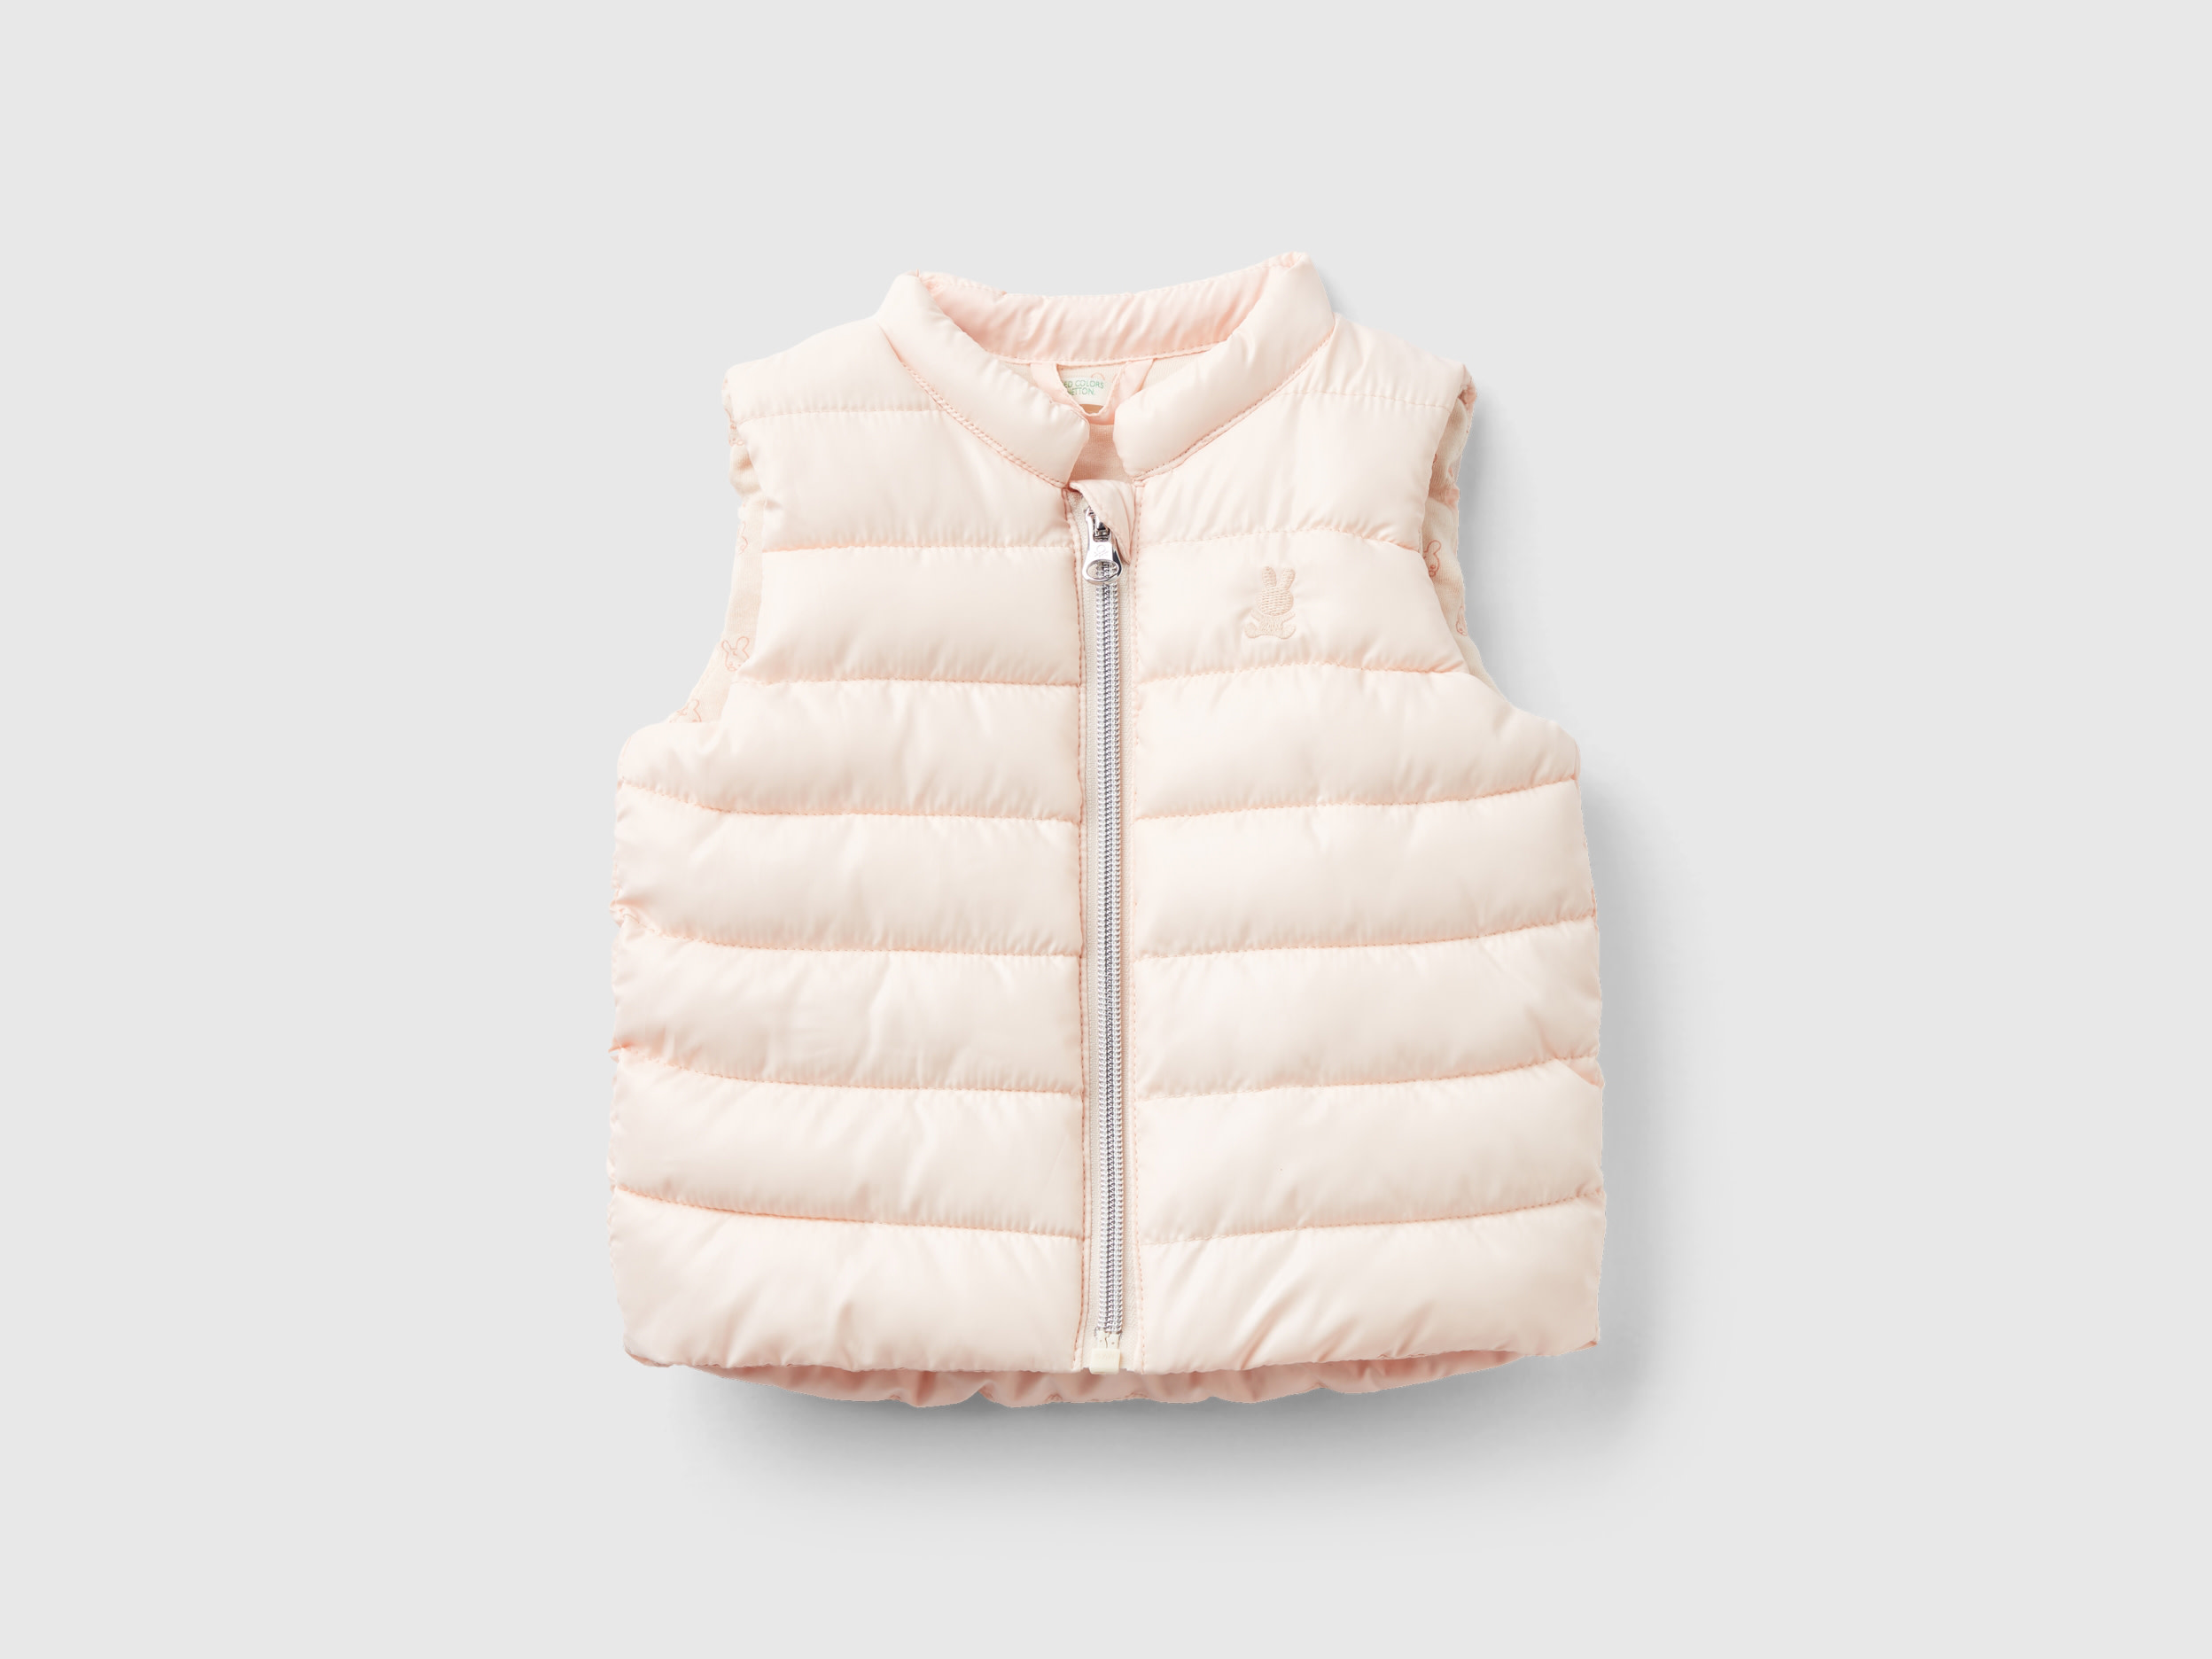 Benetton, Padded Vest In Technical Fabric, size 9-12, Peach, Kids